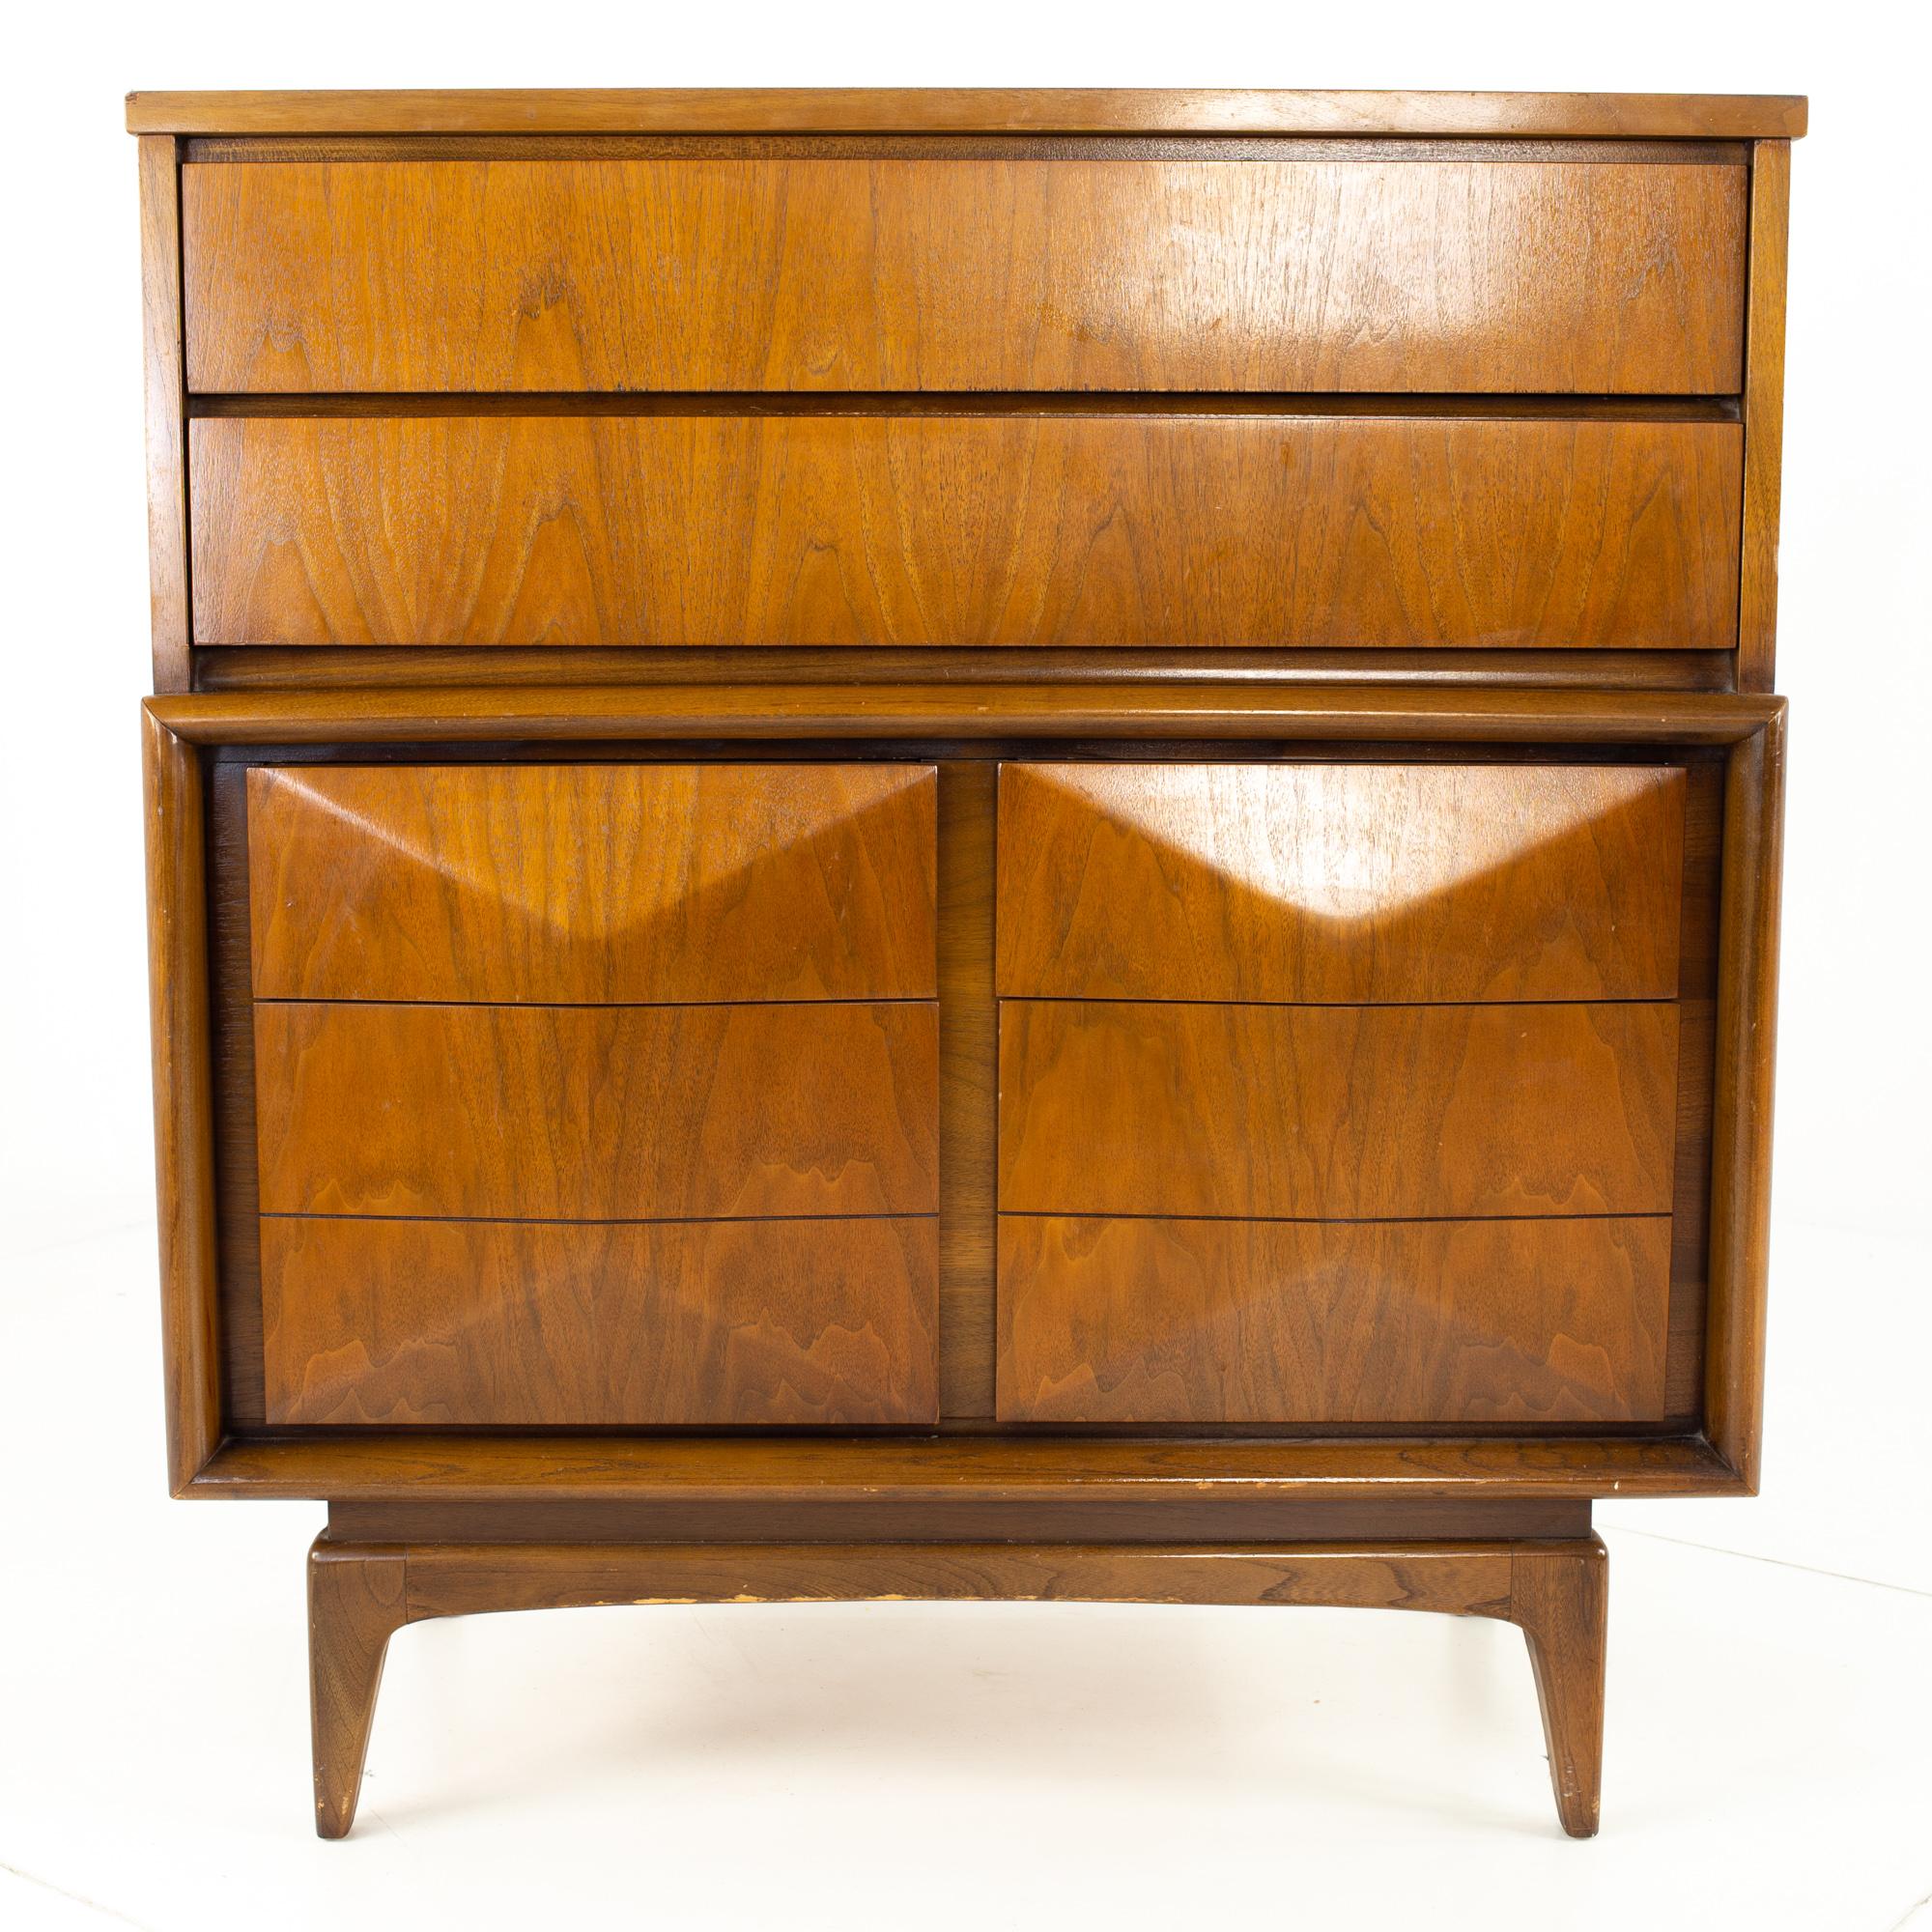 United mid century diamond 8 drawer walnut highboy dresser.

This dresser measures: 40 wide x 17.5 deep x 43.75 inches high

All pieces of furniture can be had in what we call restored vintage condition. That means the piece is restored upon